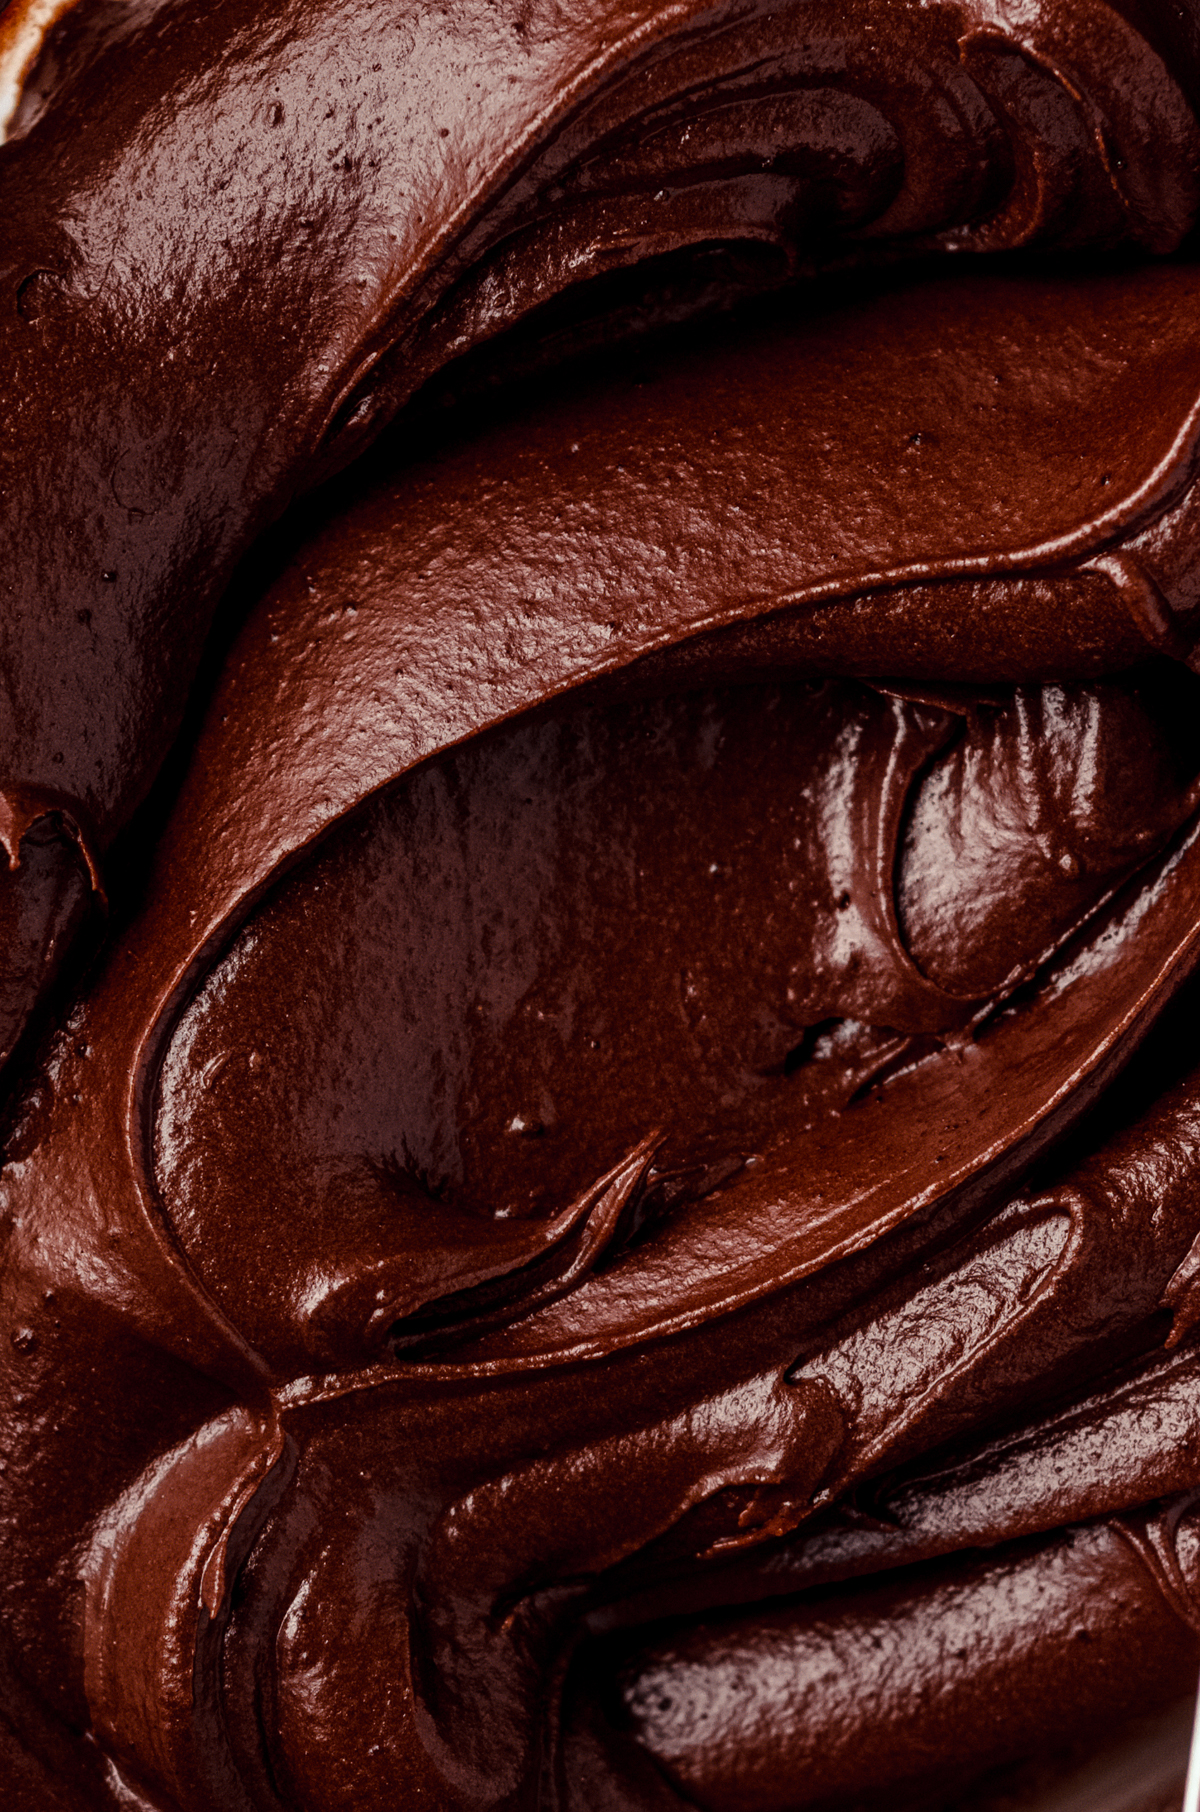 Closeup of chocolate frosting made with cocoa powder.